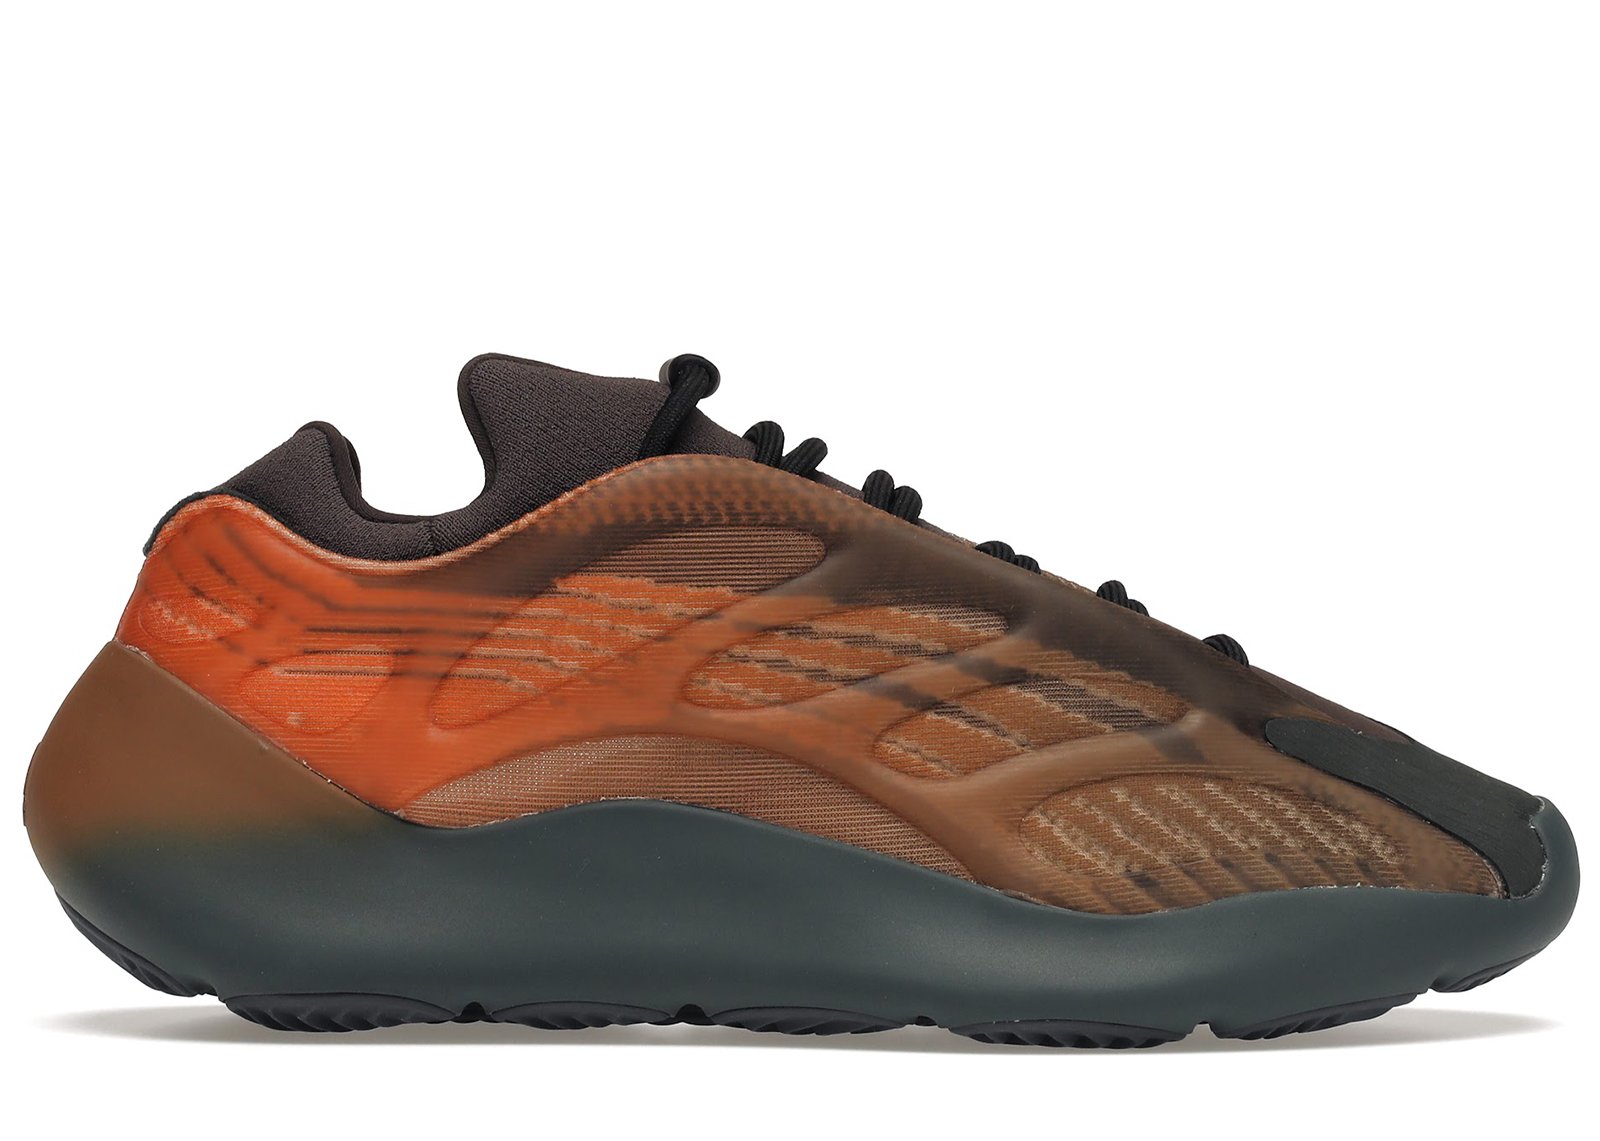 adidas Yeezy 700 V3 Copper Fade sneakers